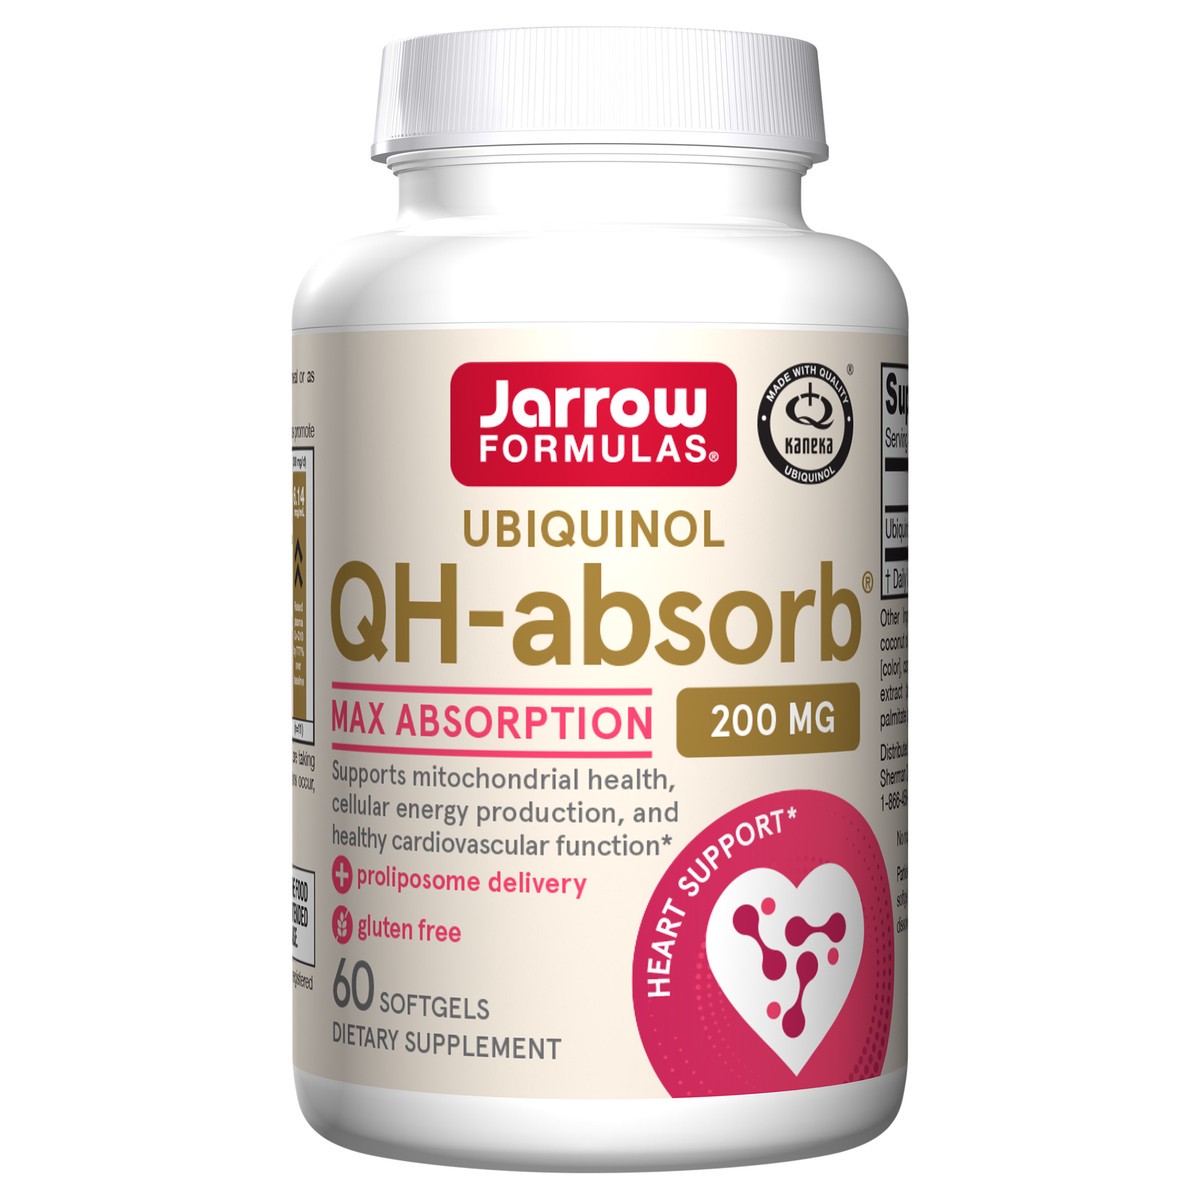 slide 1 of 2, Jarrow Formulas QH-absorb 200 mg - High Absorption Co-Q10 - Active Antioxidant Form of Co-Q10 - Supports Mitochondrial Energy Production &Cardiovascular Health - Up to 60 Servings, 60 ct